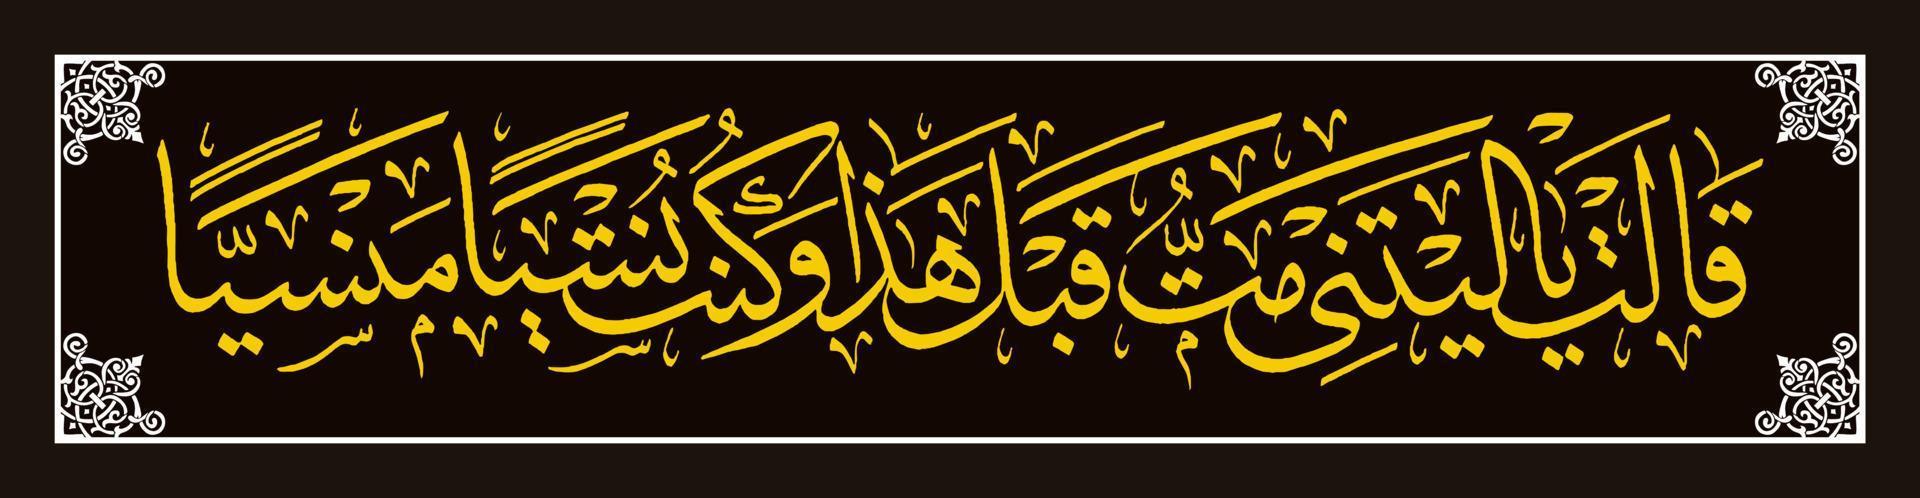 rabic Calligraphy, Al Qur'an Surah Maryam Verse 23, Translation O, how good that I died before this, and I became someone who is not noticed and forgotten. vector